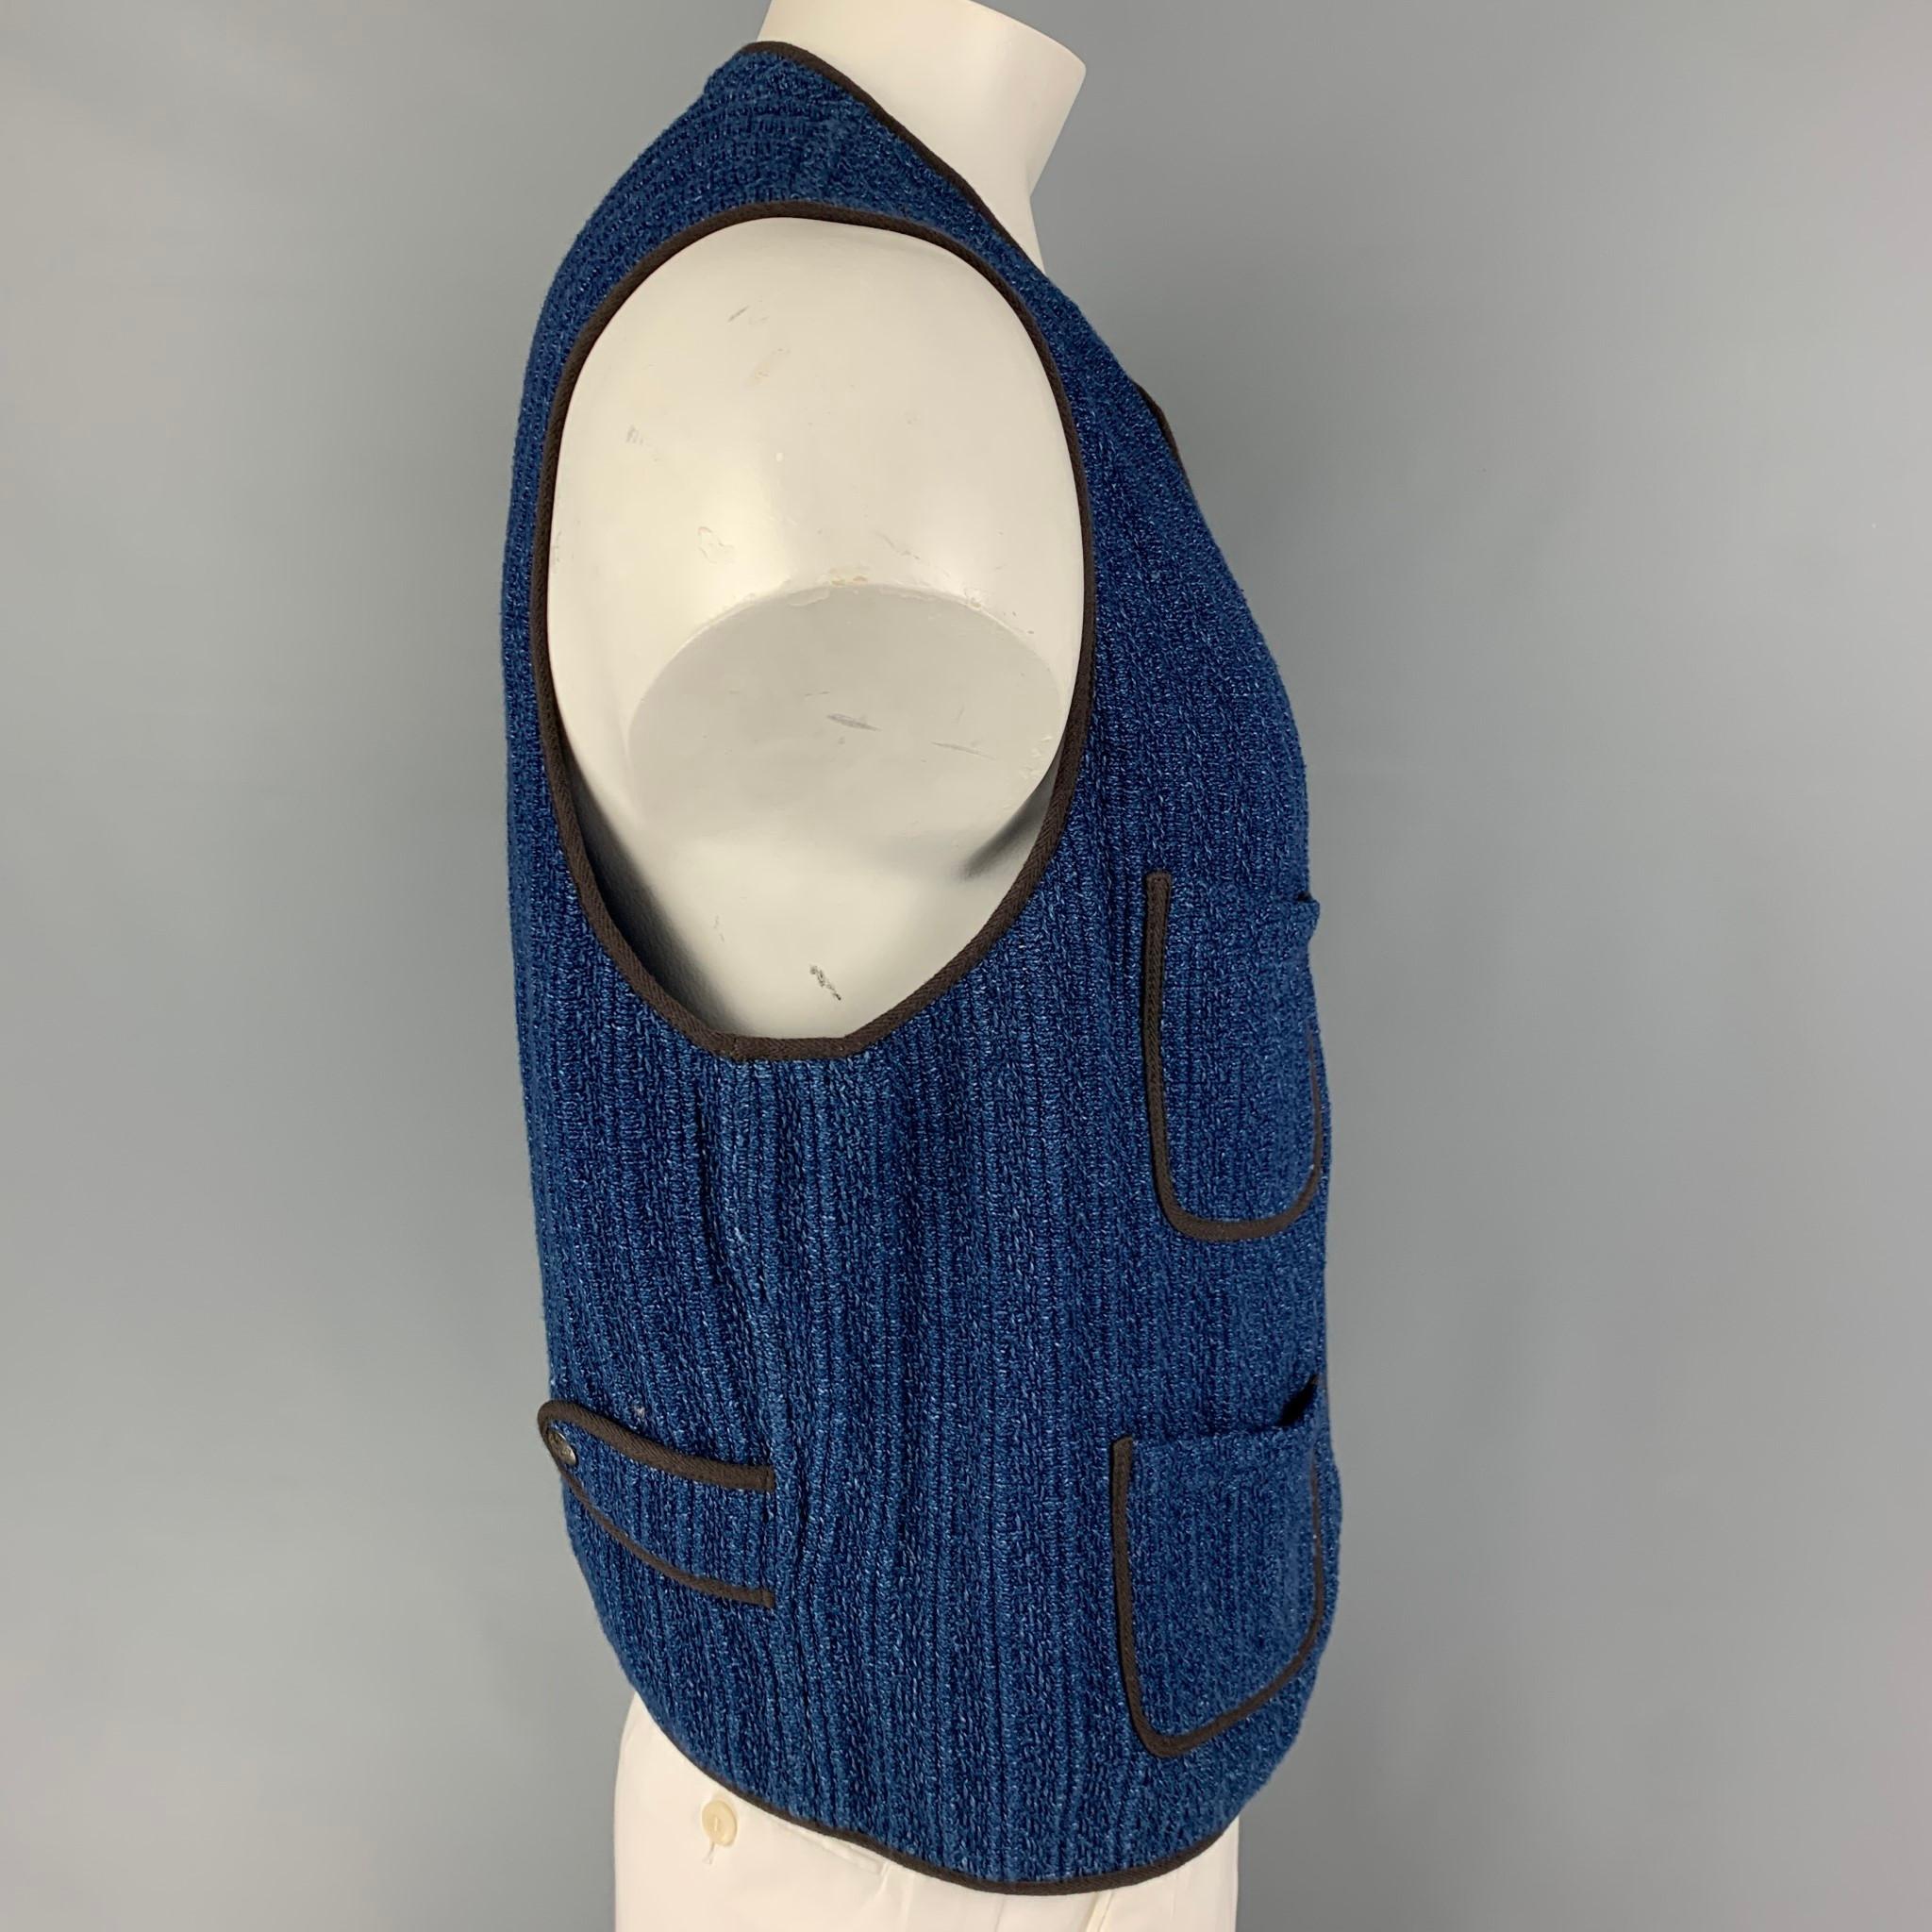 RRL by RALPH LAUREN vest comes in a blue knitted cotton featuring a black trim featuring patch pockets and a snap buttoned closure. 

Very Good Pre-Owned Condition.
Marked: XL

Measurements:

Shoulder: 17 in.
Chest: 46 in.
Length: 21.5 in. 